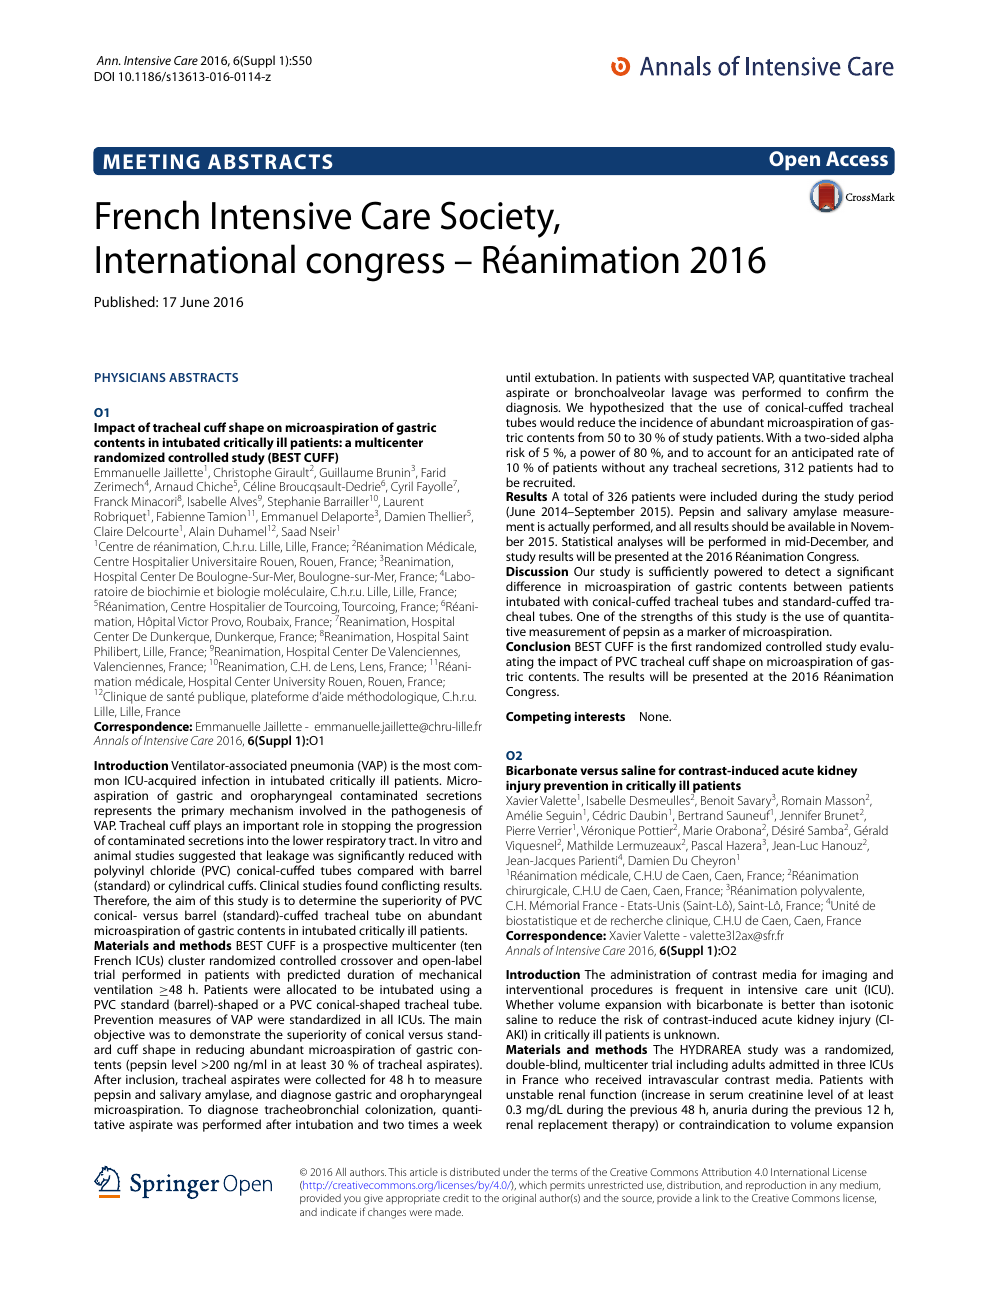 French Intensive Care Society International Congress